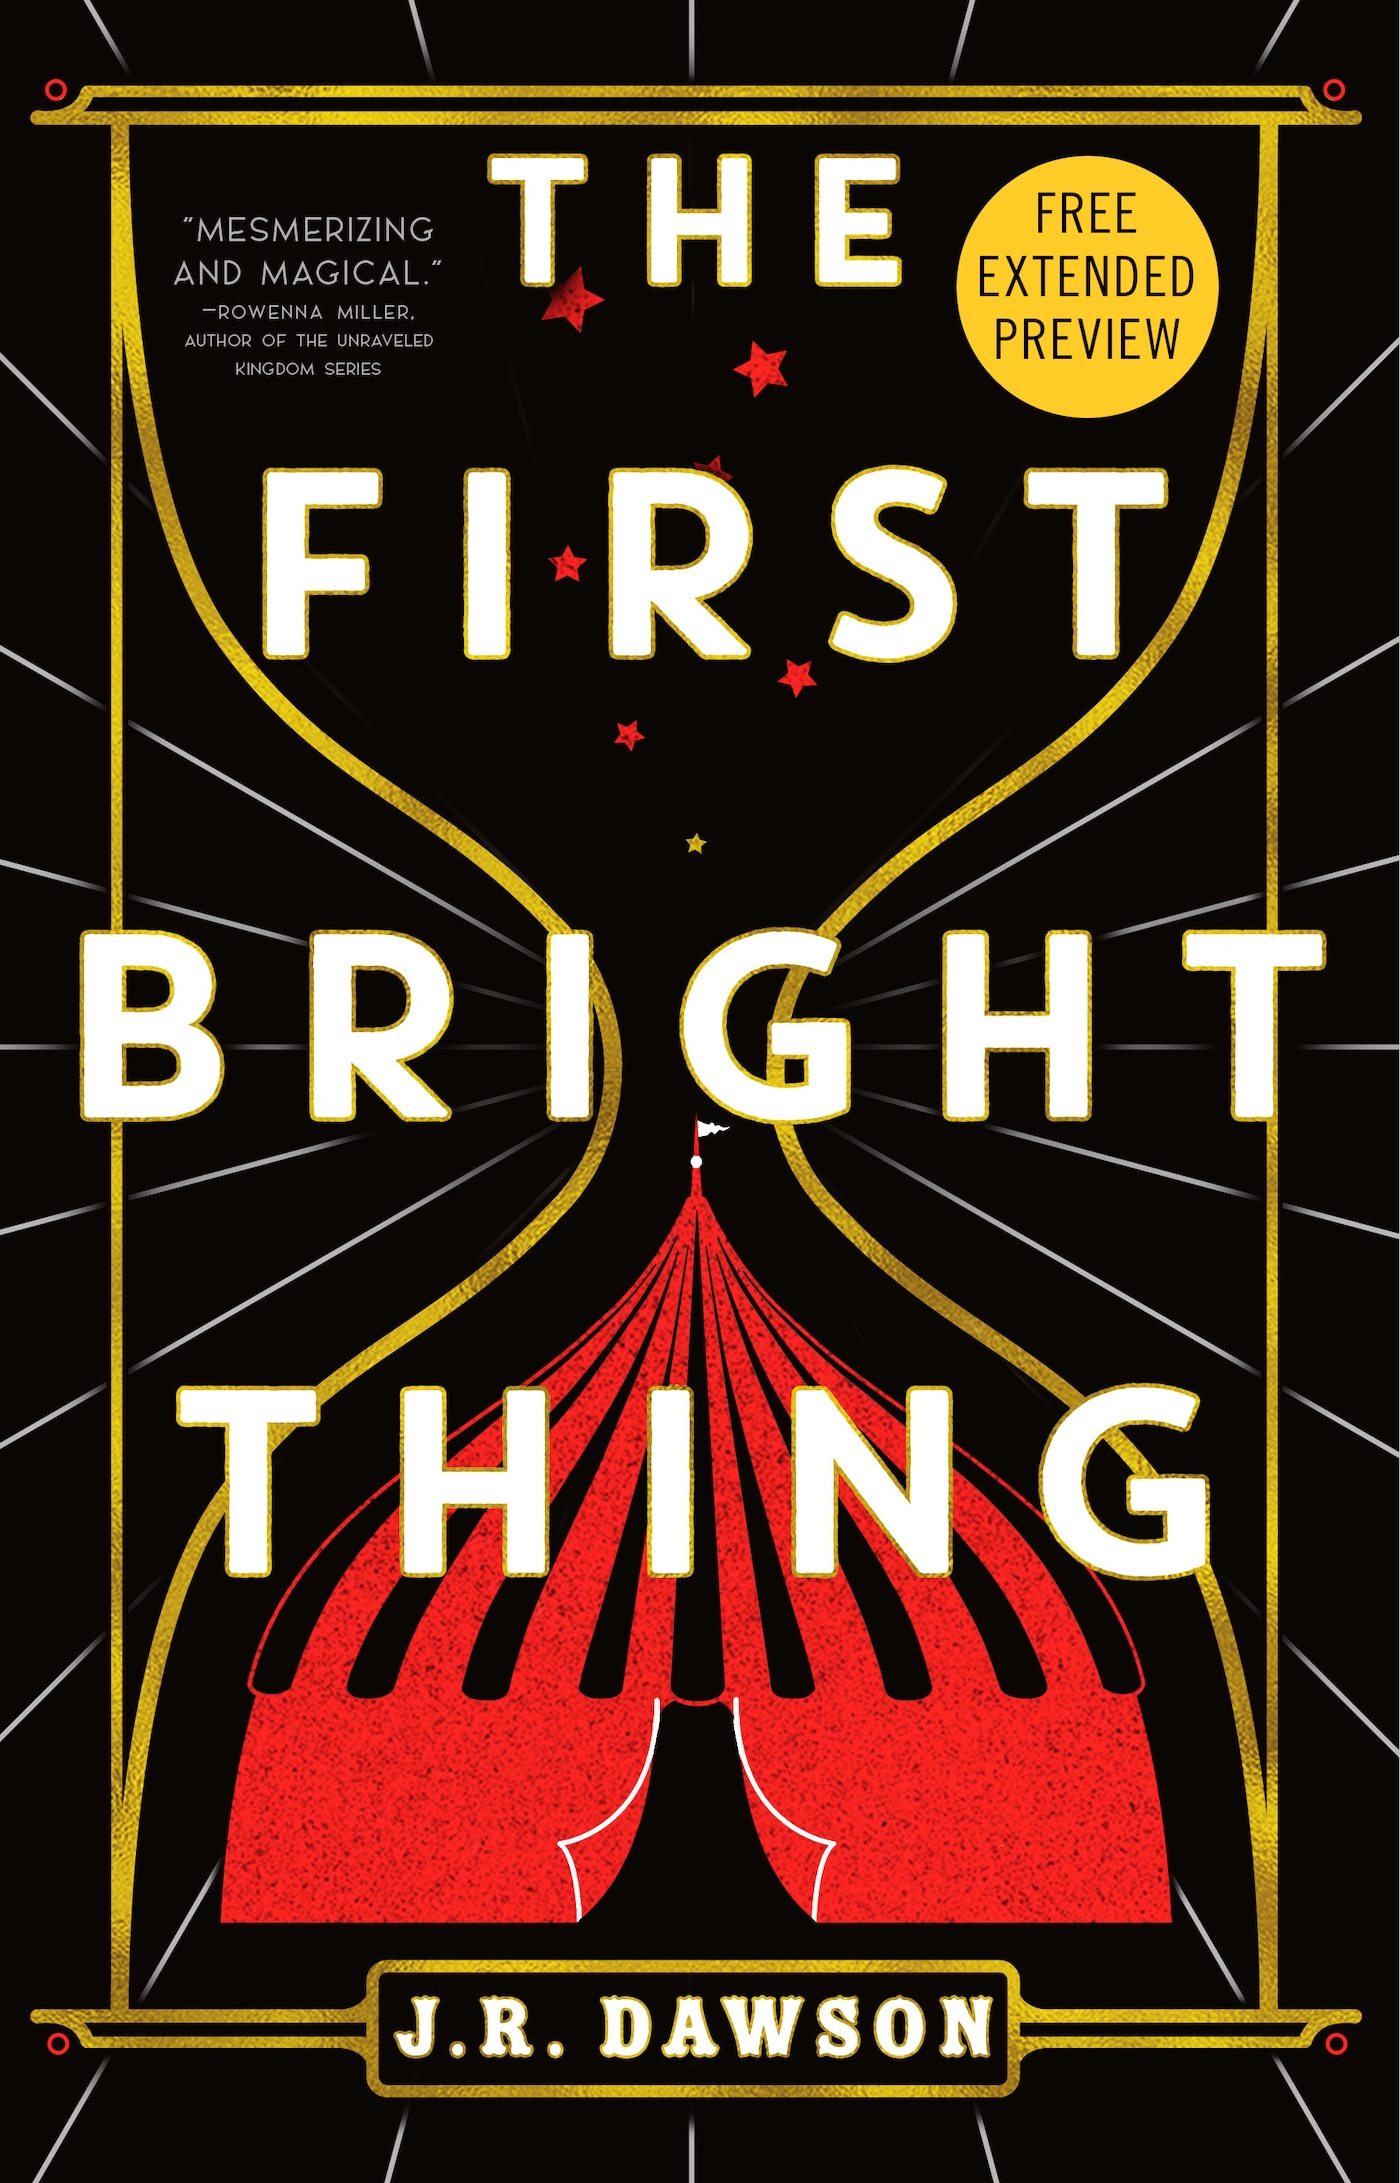 Sneak Peek for The First Bright Thing by J. R. Dawson